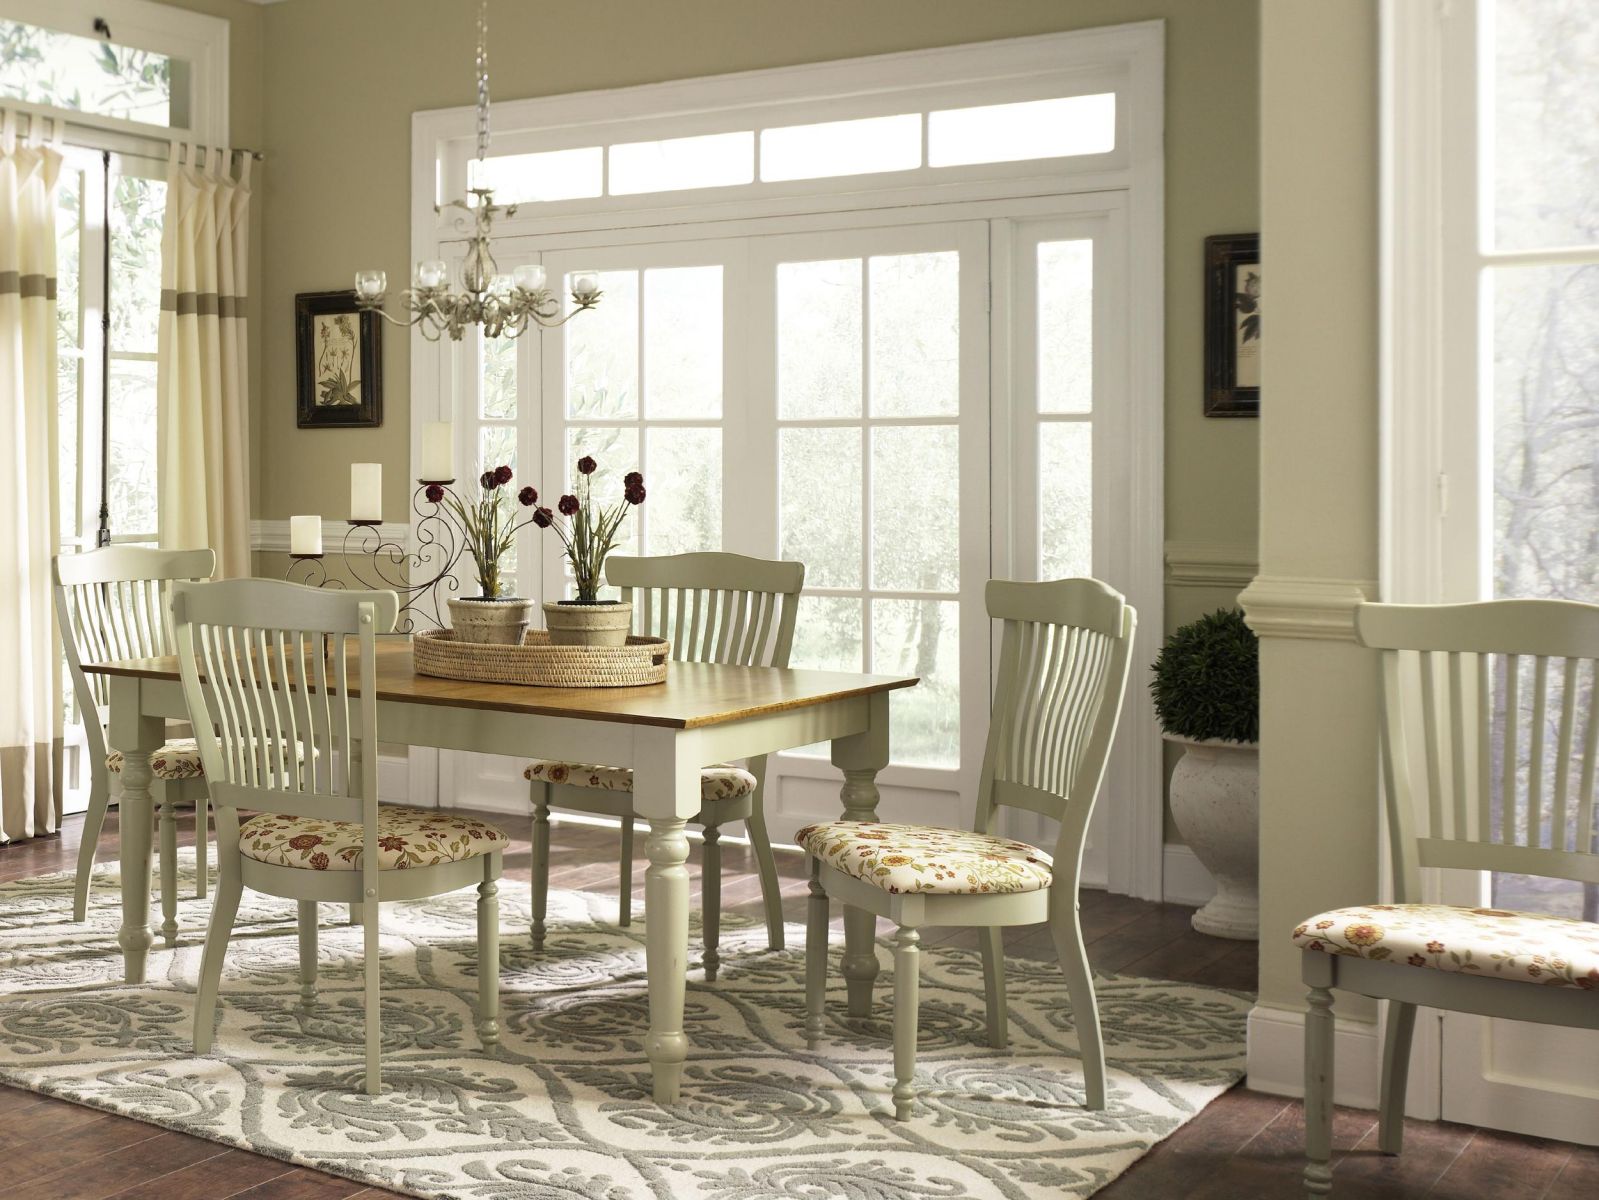 On Style Today 2020 05 06 Country Style Dining Room Chairs Here